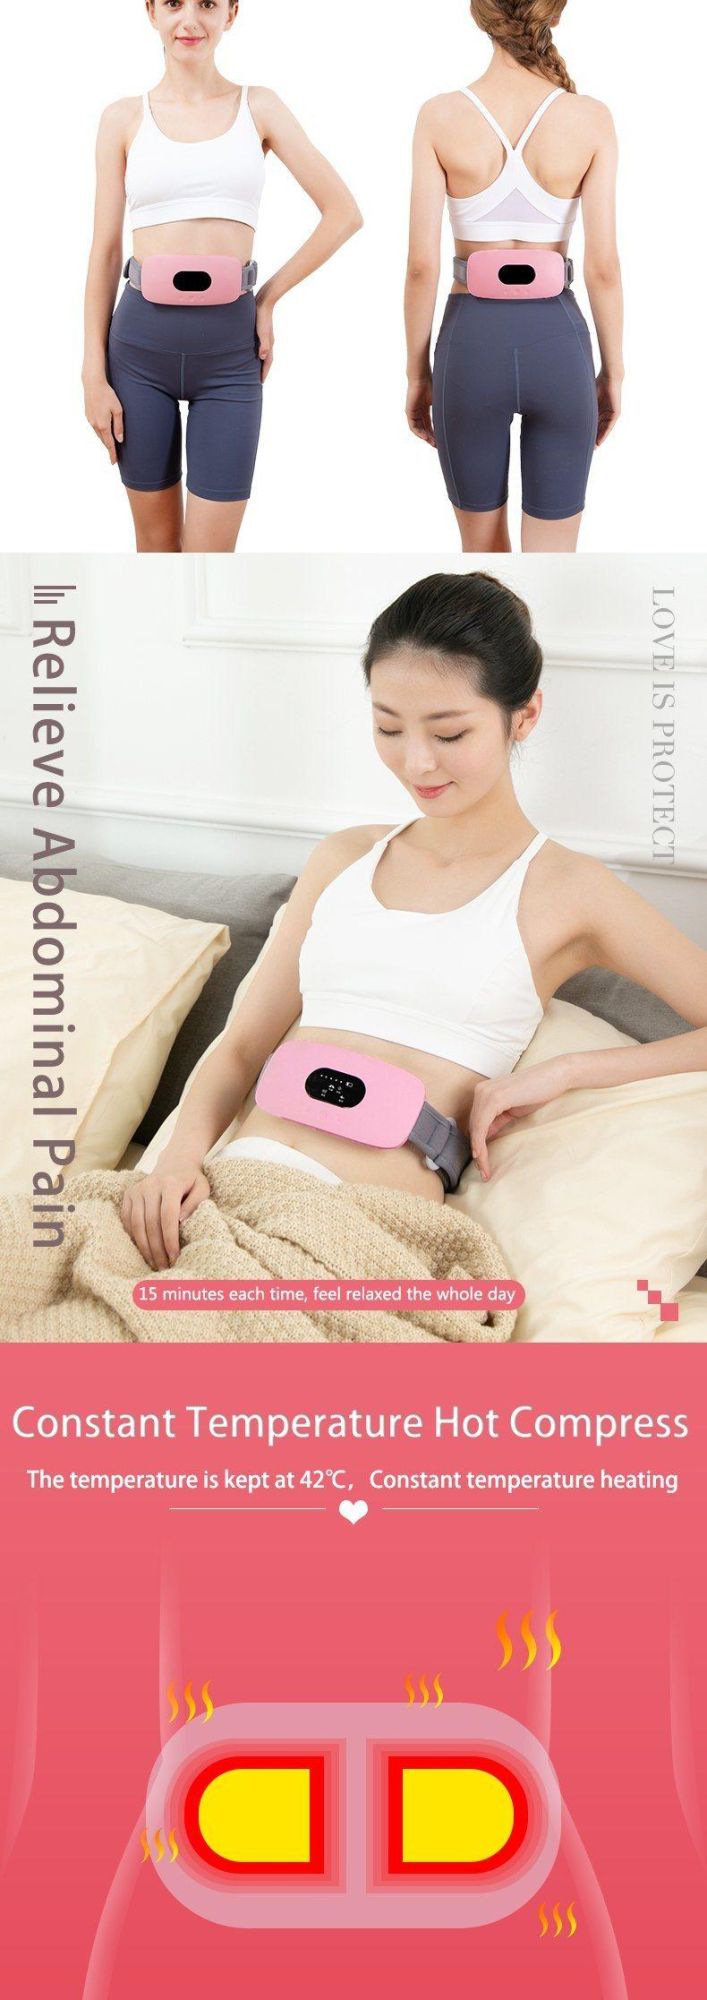 Hezheng Electric Fat Burning Body Care Slimming Belly Massager Belt